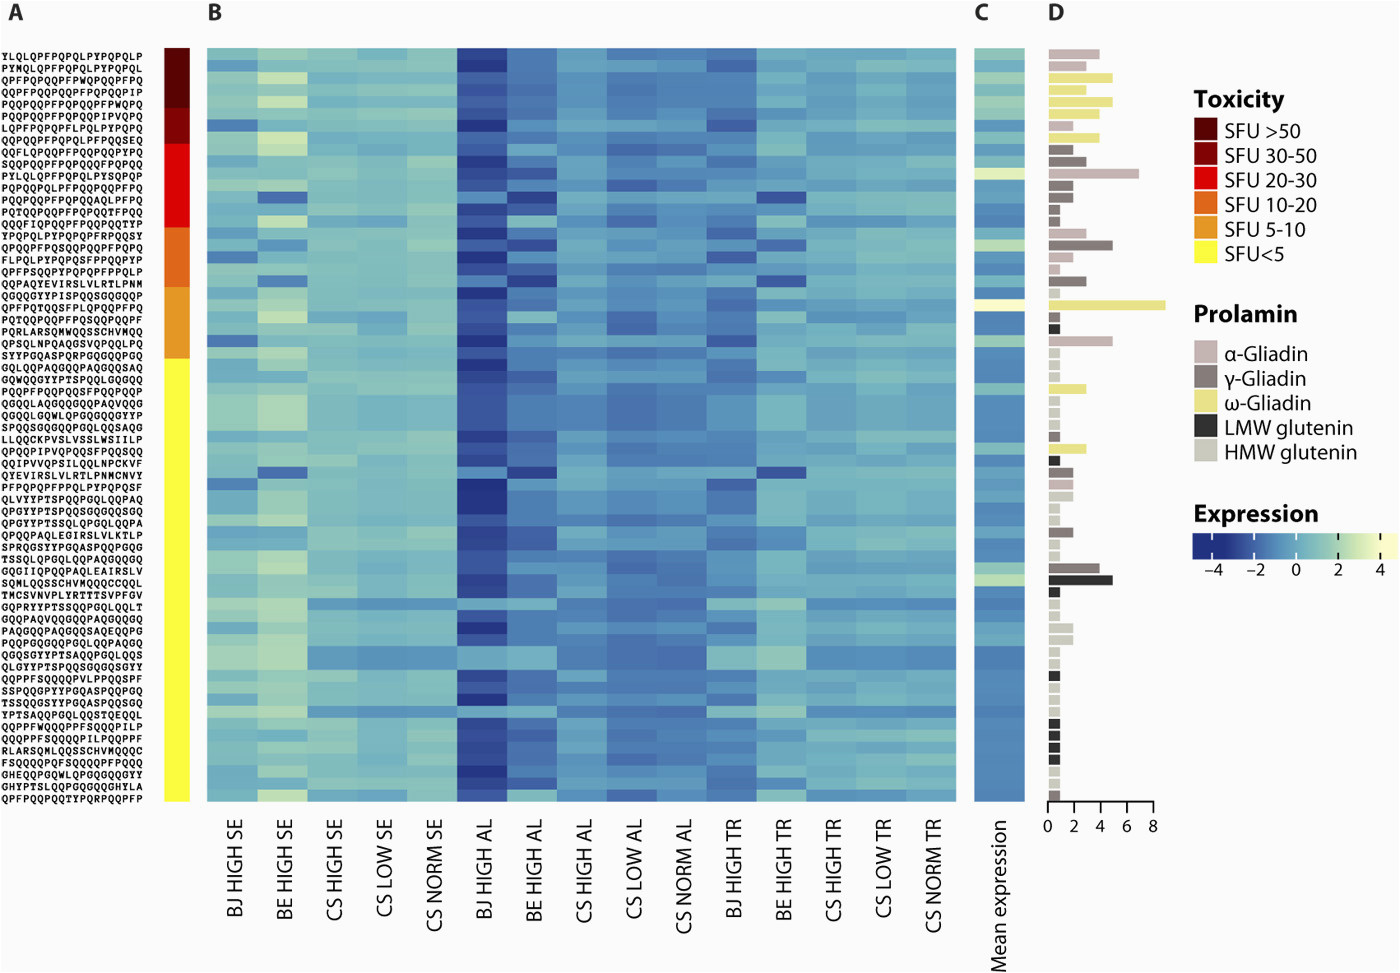 genome mapping of seed borne allergens and immunoresponsive proteins